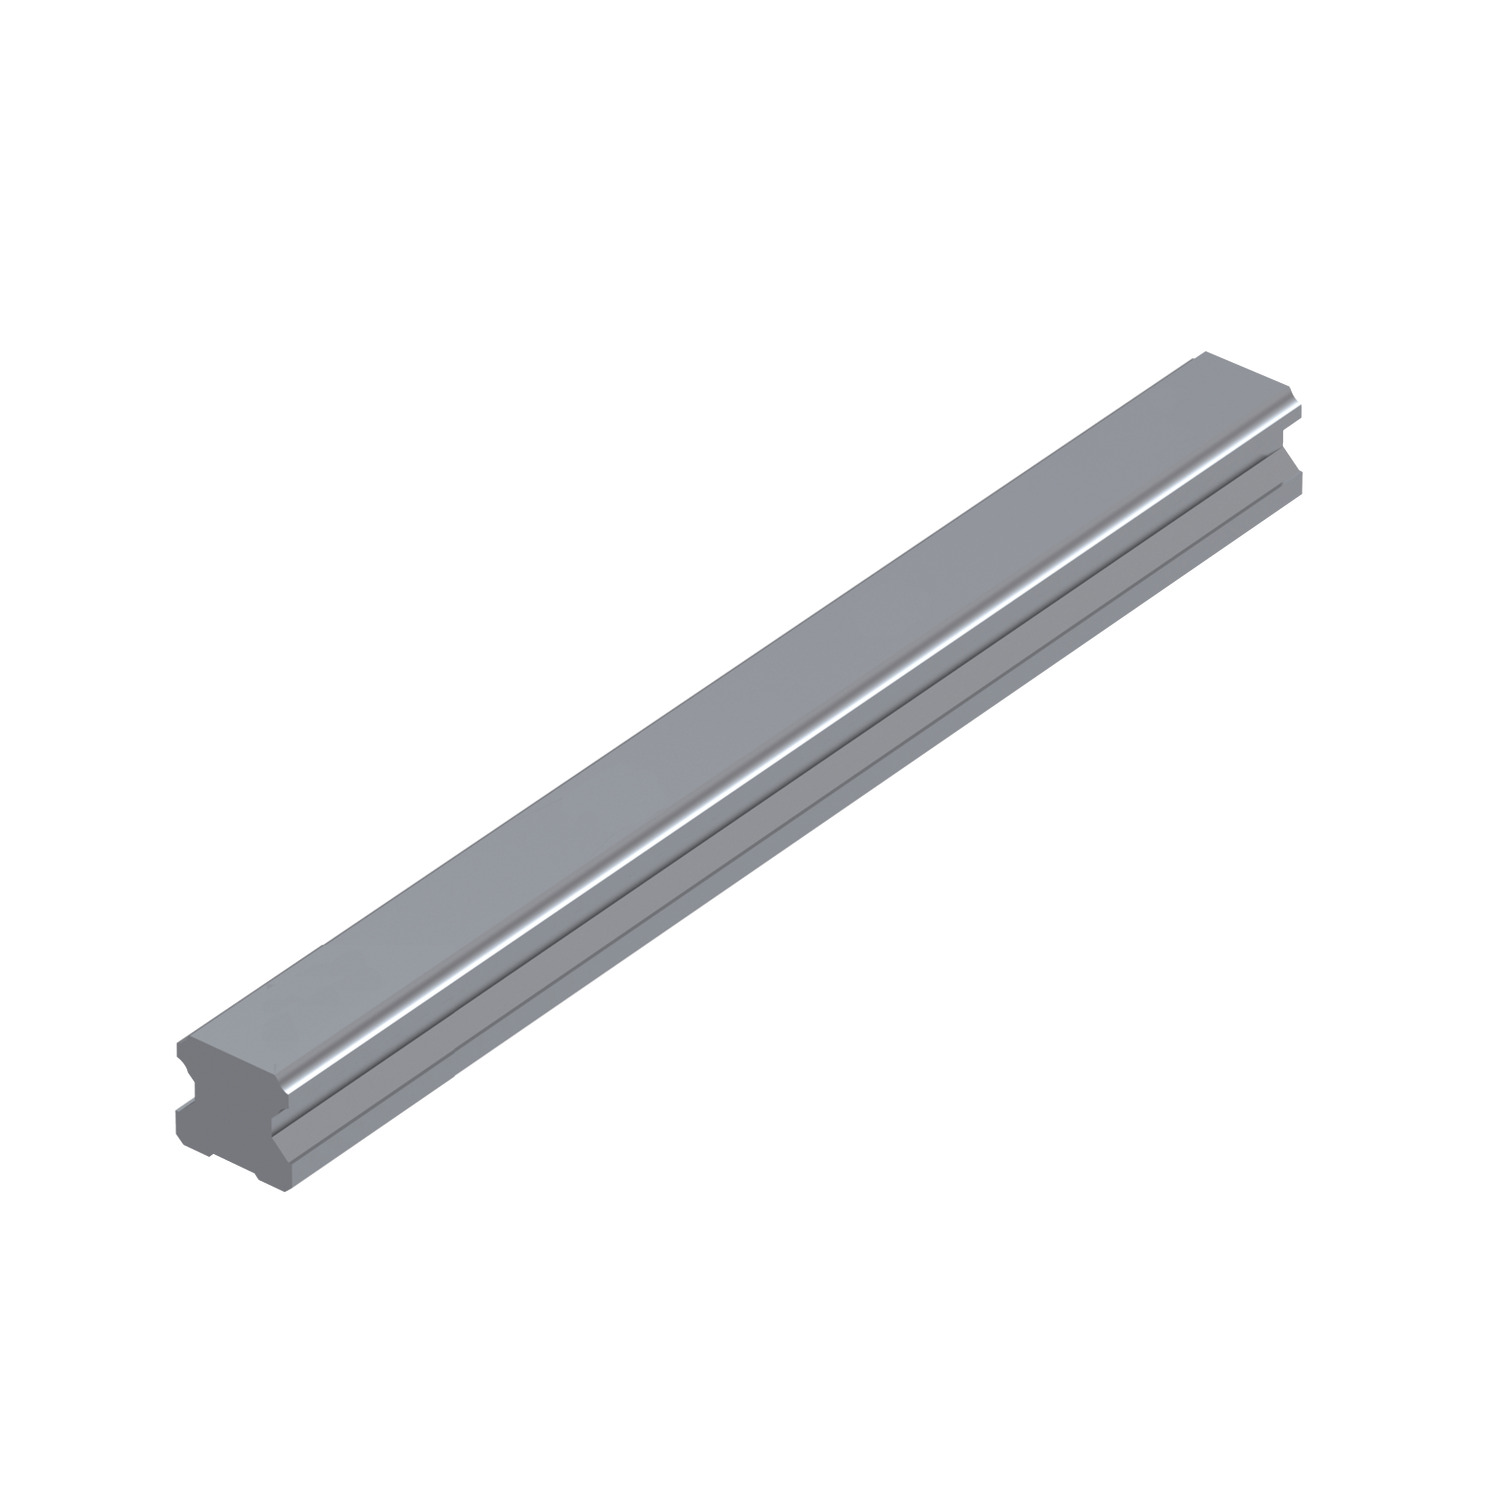 L1016.RF20-3460 Linear guide rail rear fixing 20mm 3460 Hardened and ground steel. EC:20167226 WG:05063055295871